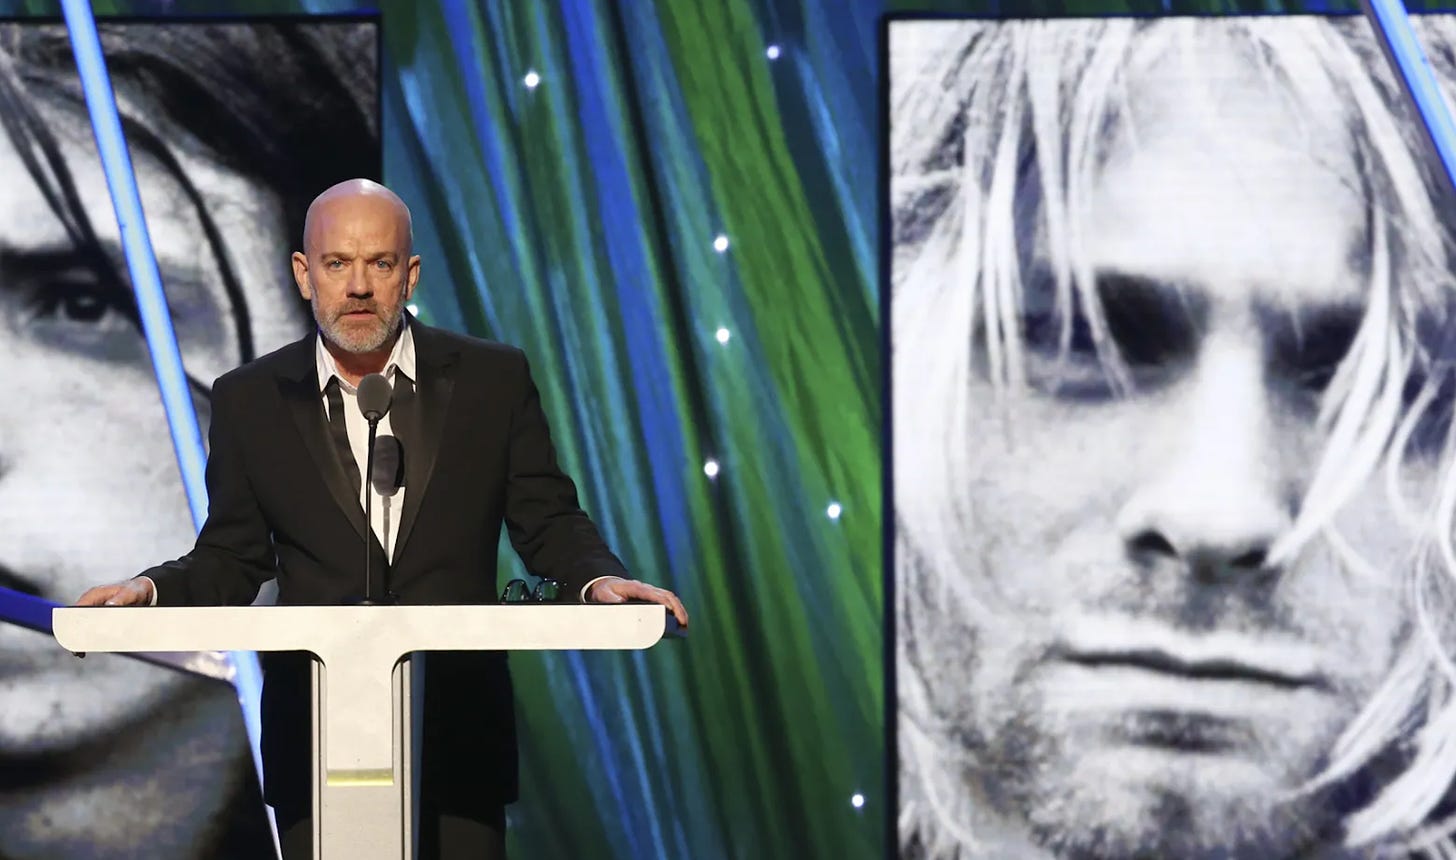 Michael Stipe gives induction speech for Nirvana at the 2014 Rock Hall of Fame